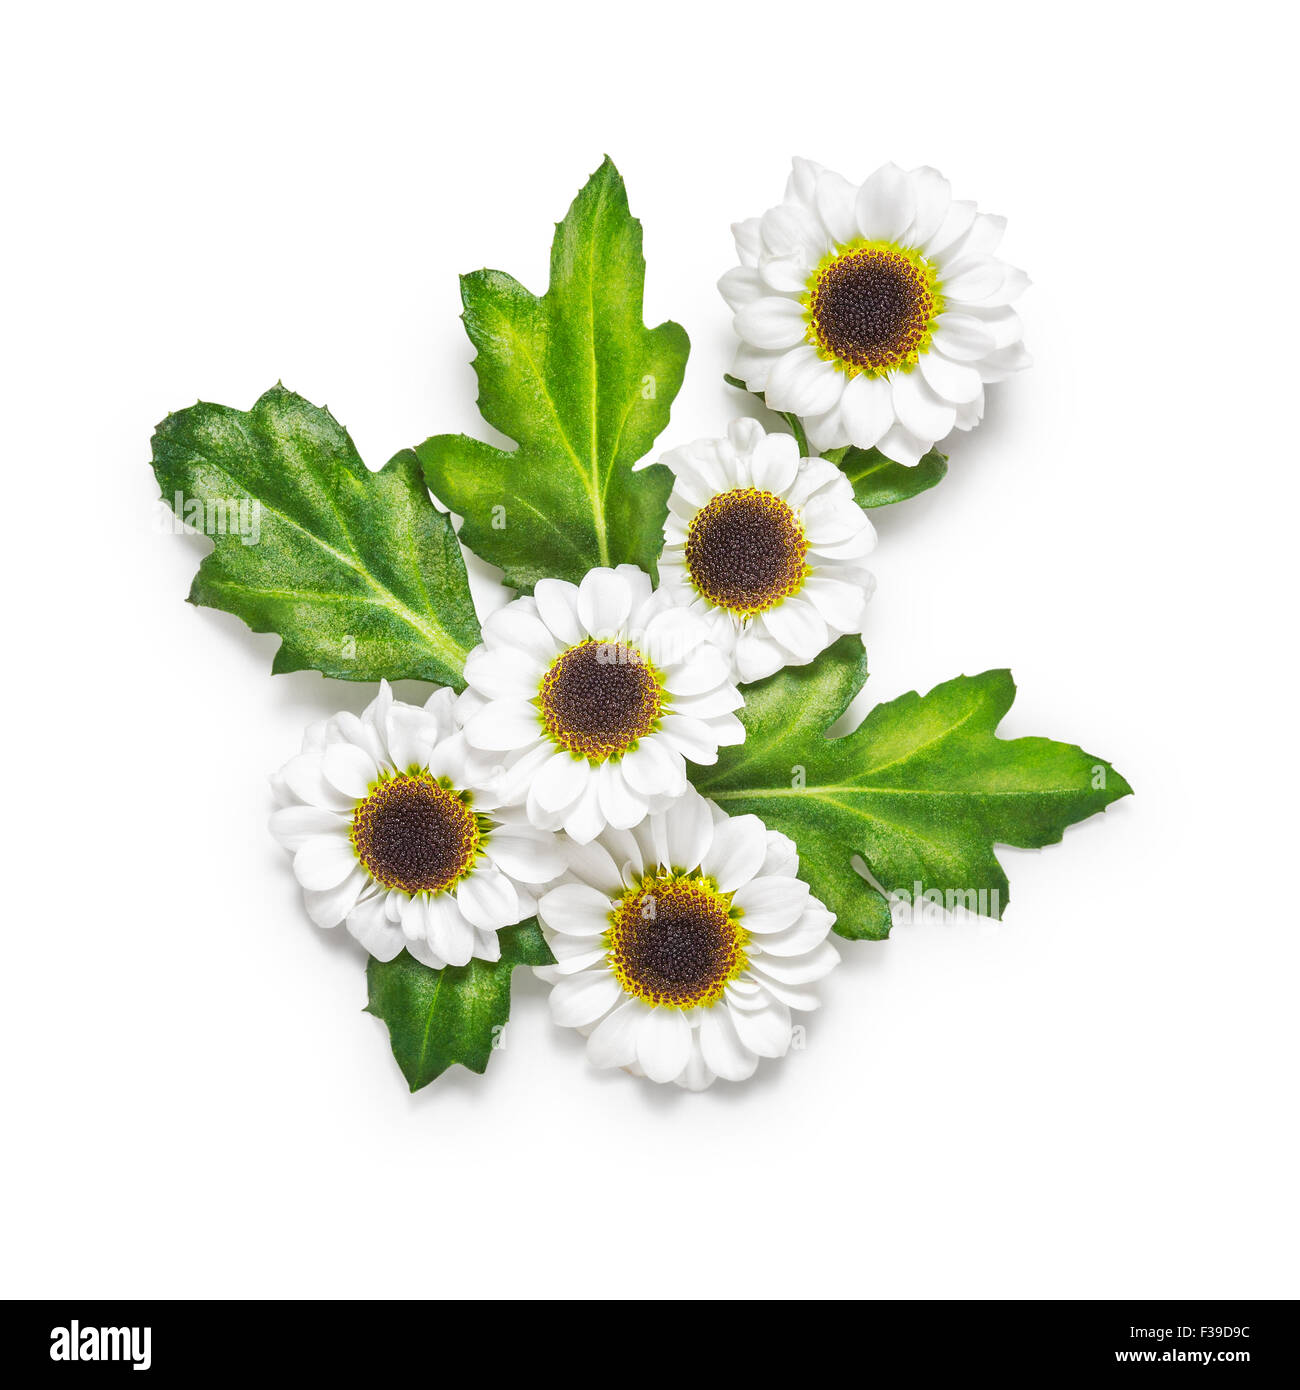 Autumn flowers. Small chrysanthemum with leaves arrangement isolated on white background. Clipping path included Stock Photo